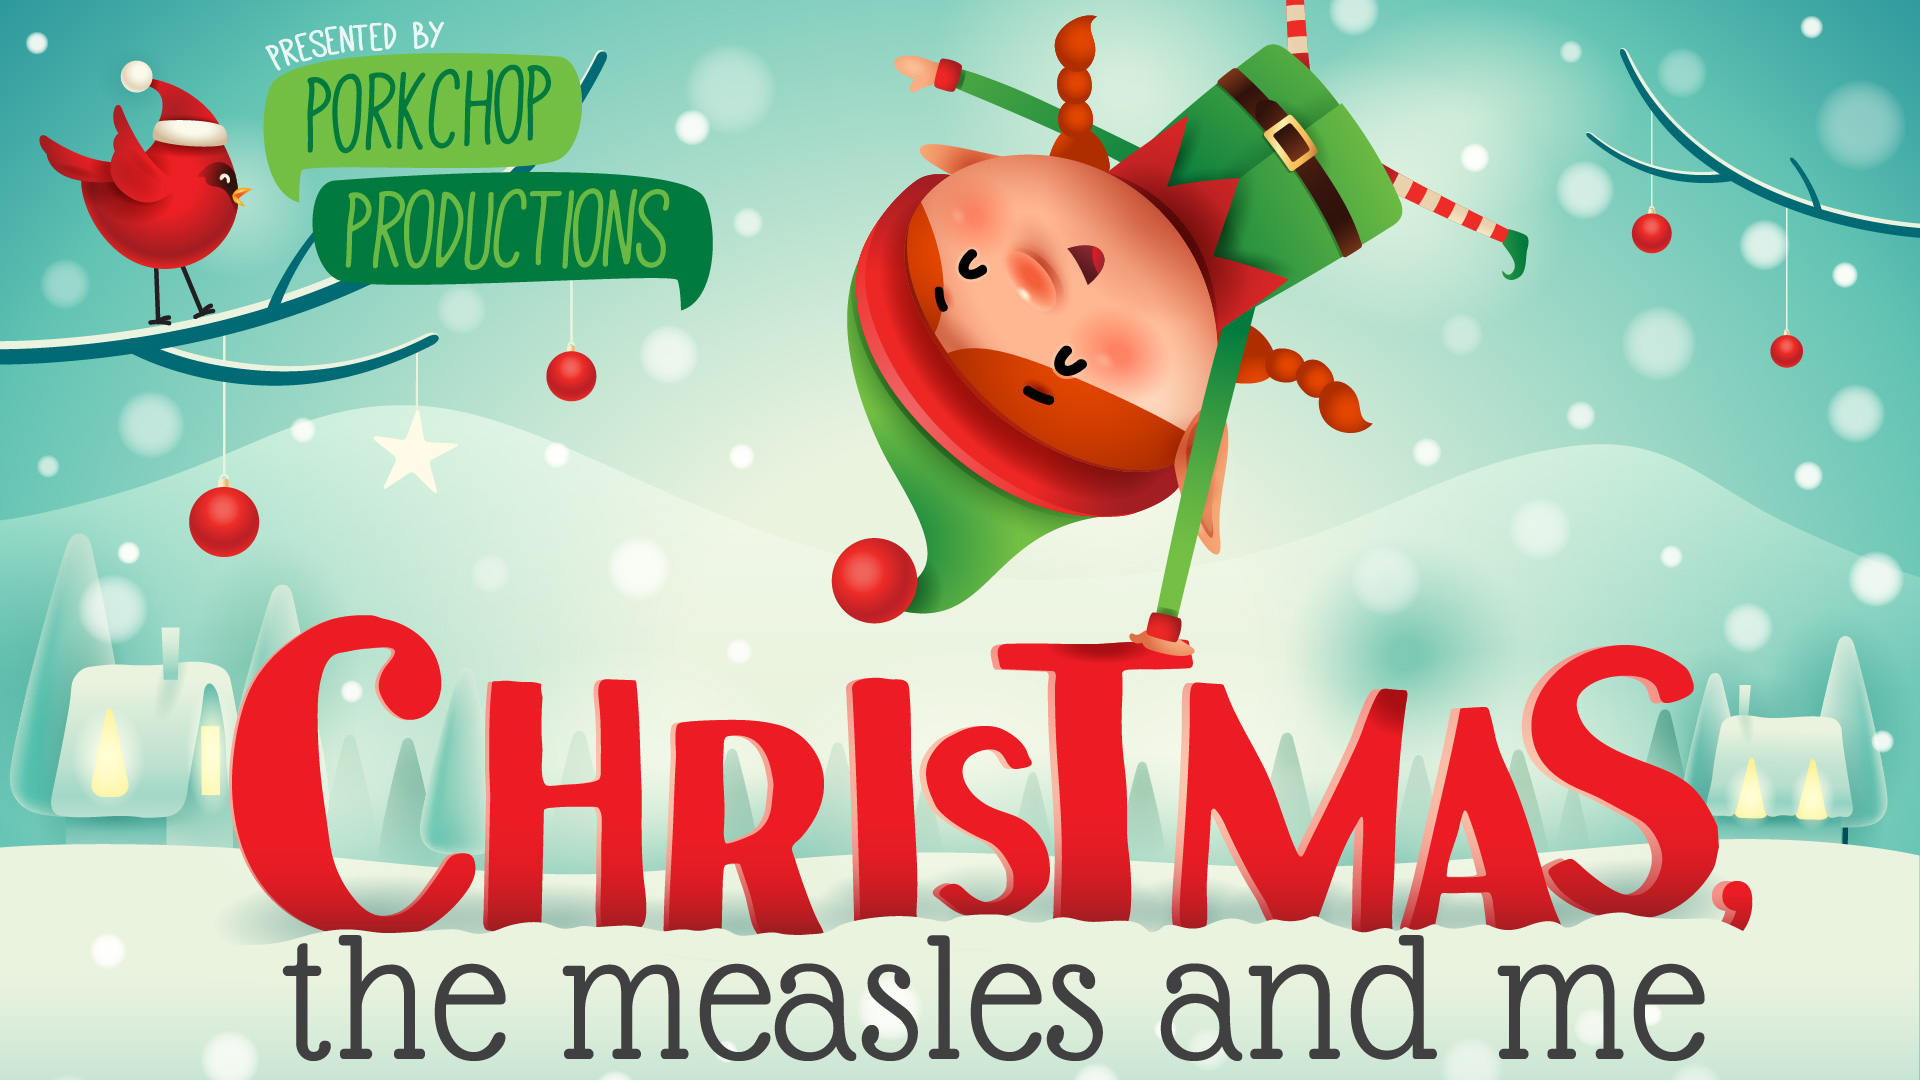 Holly the Elf: Christmas the Measles & Me presented by Porkchop Productions